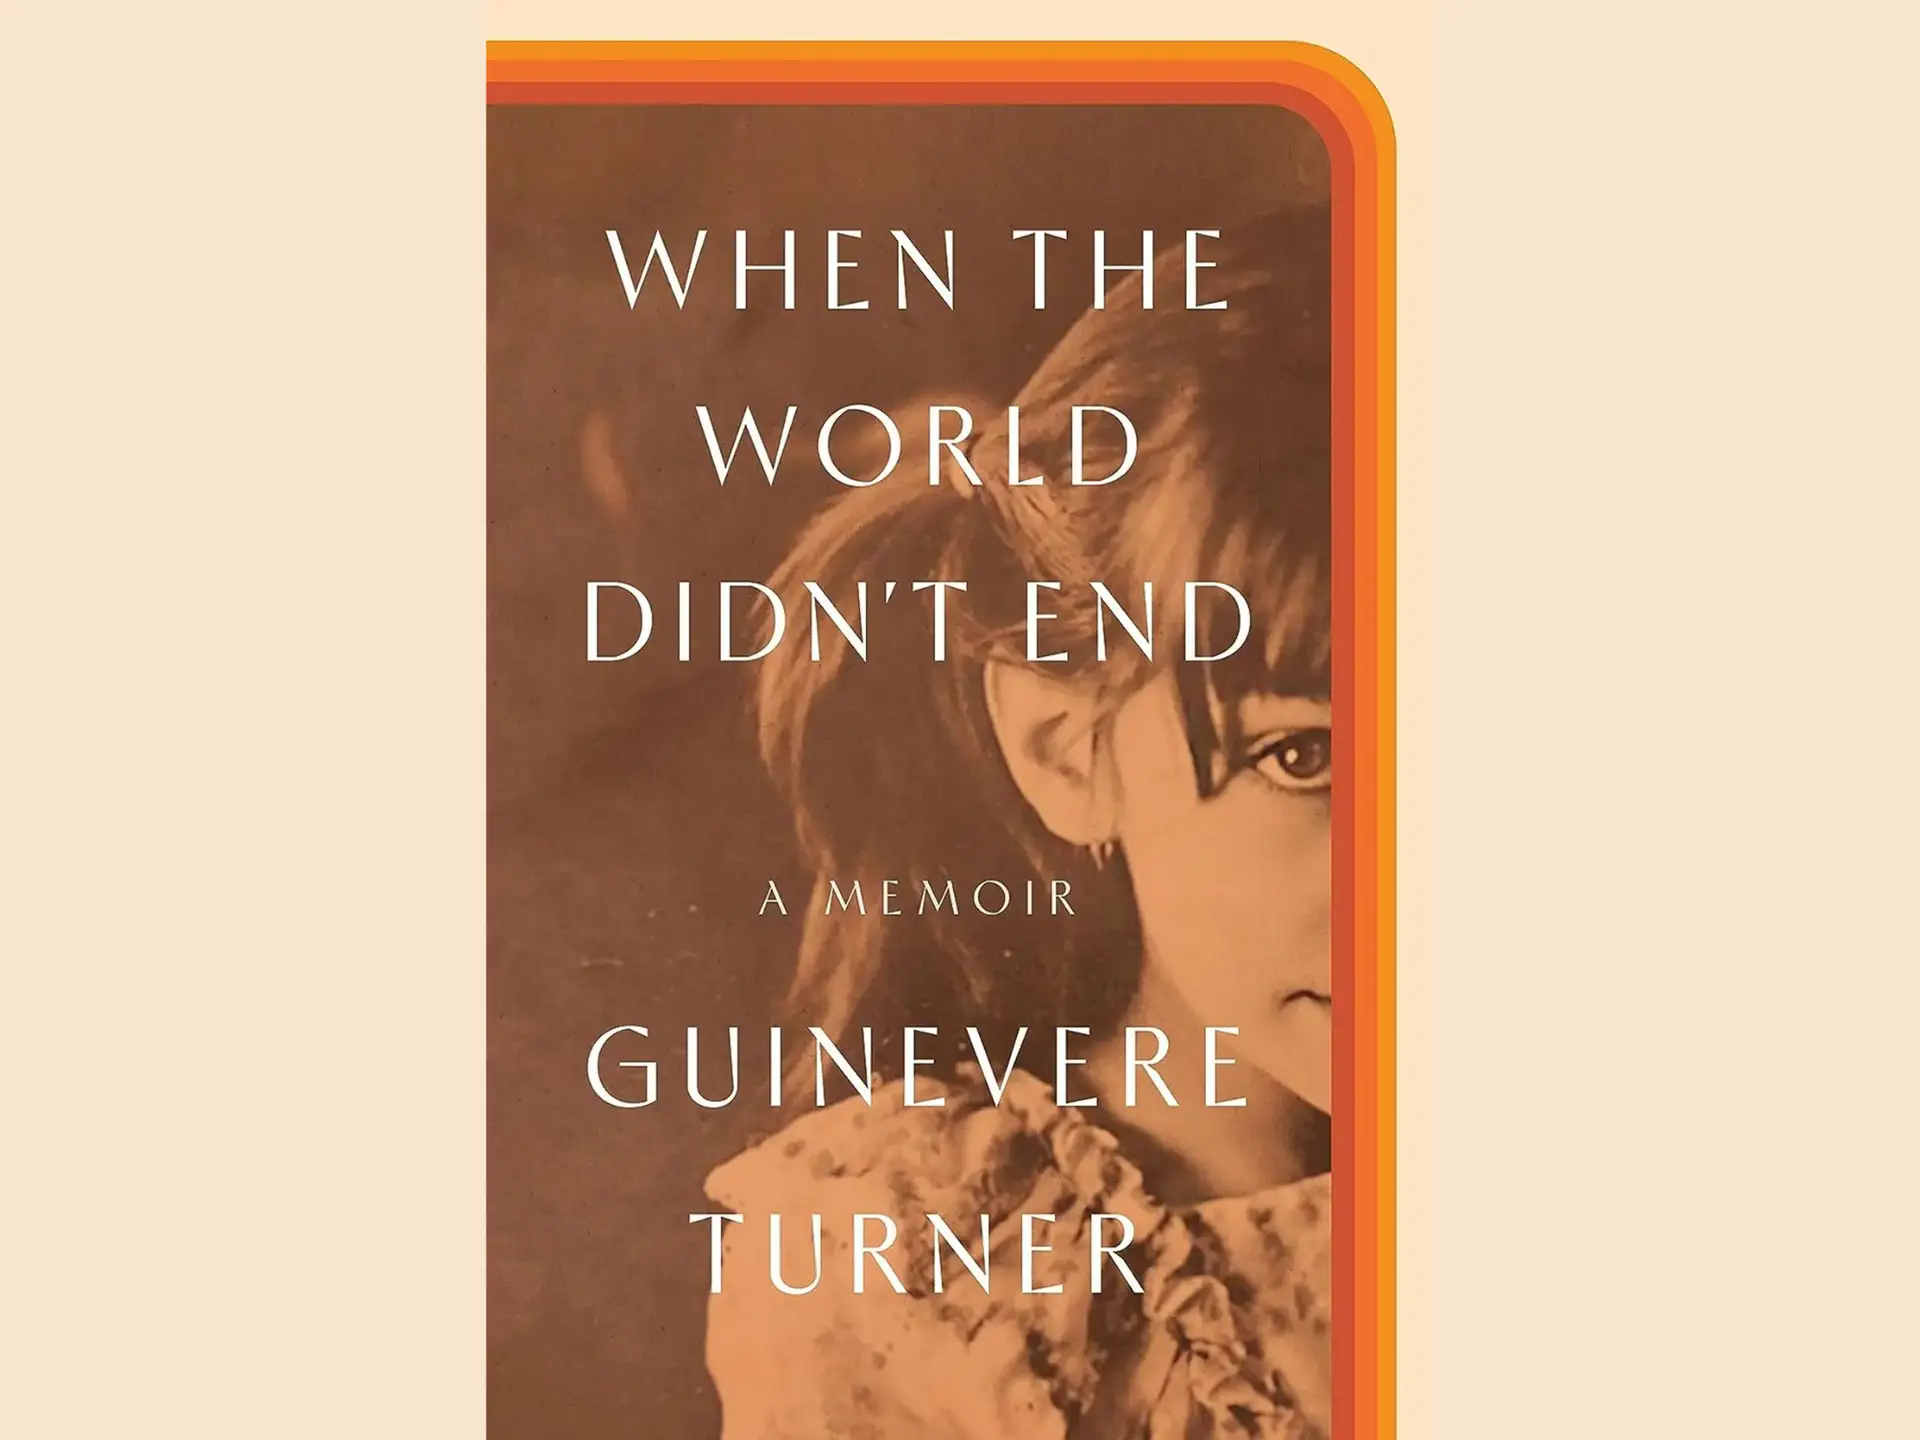 On Guinevere Turner’s “When the World Didn’t End” (1)